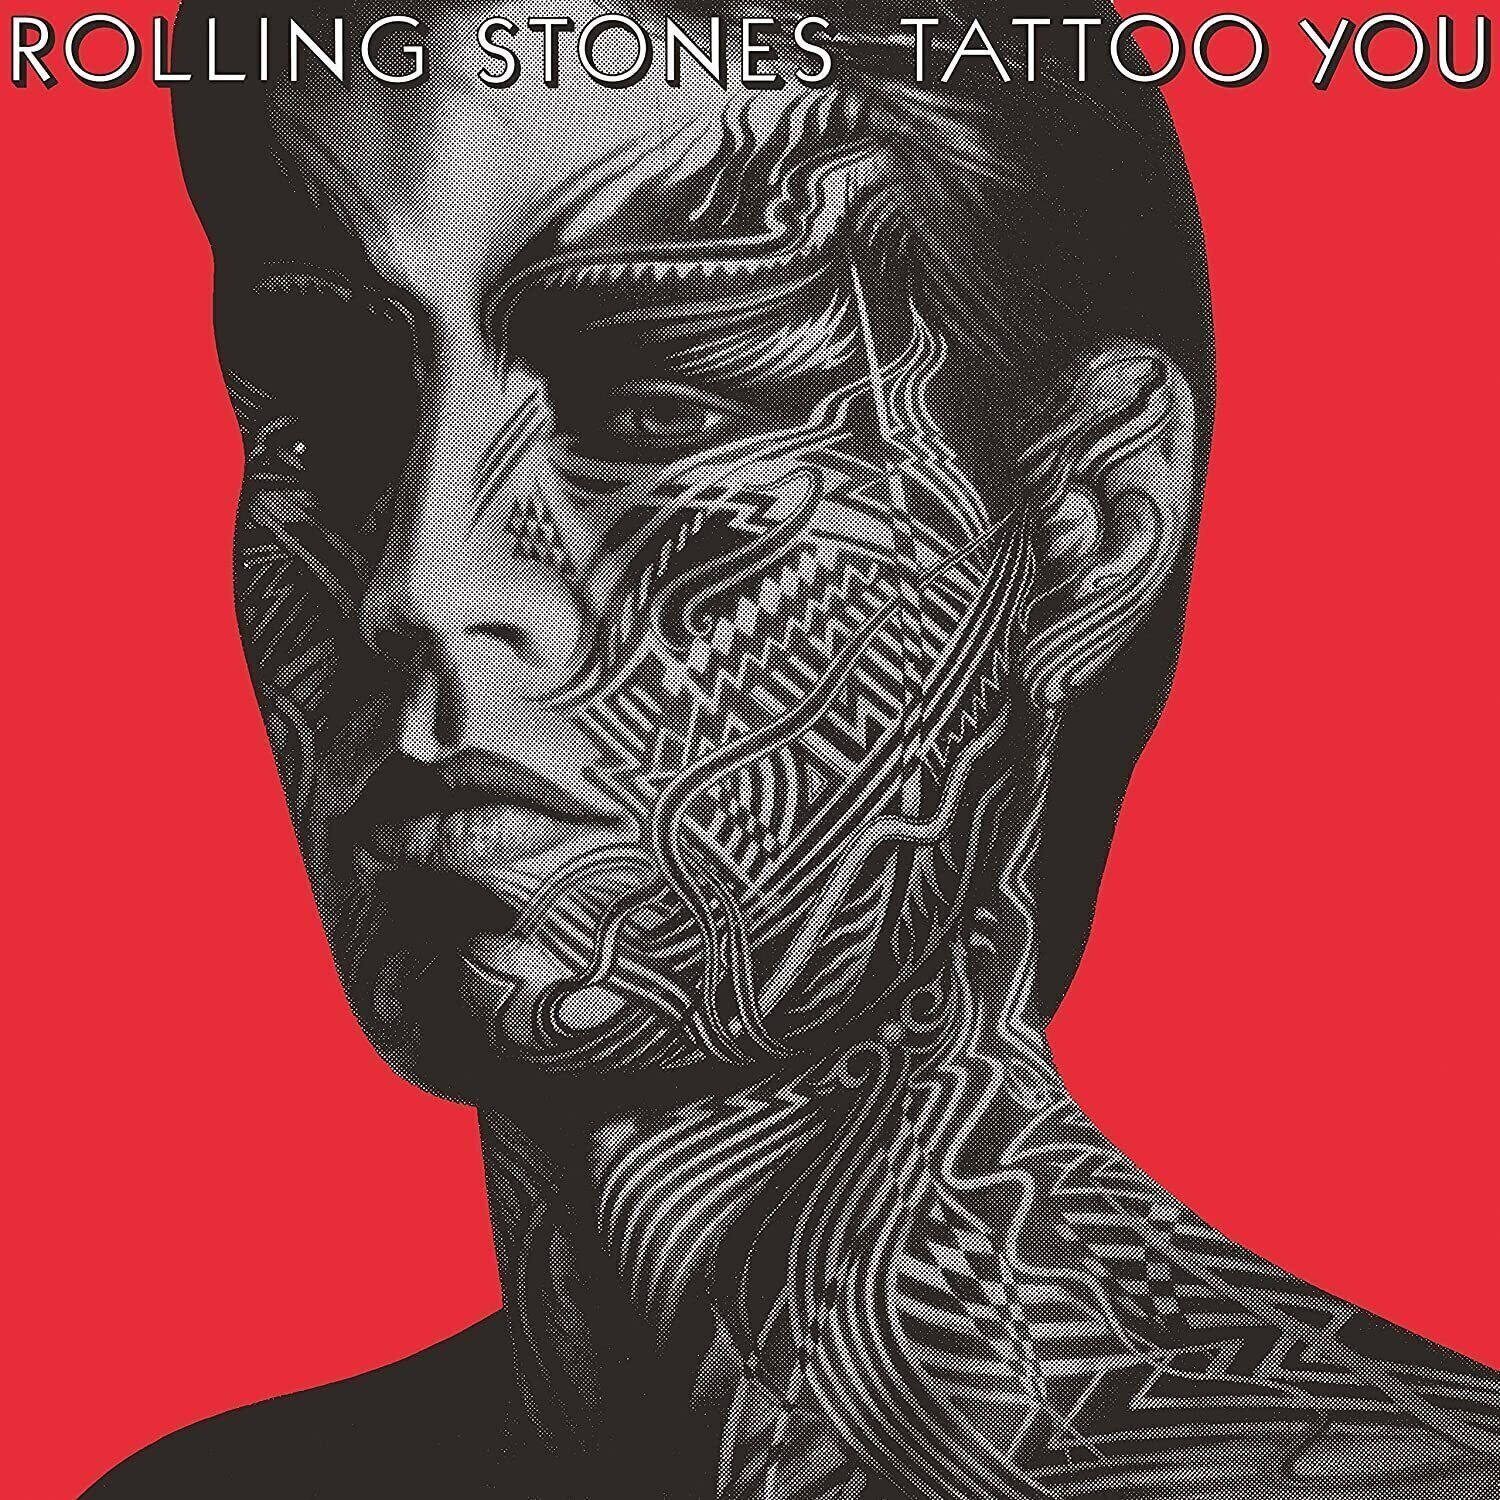 The Rolling Stones - Tattoo You (Half Speed Vinyl) (LP) The Rolling Stones